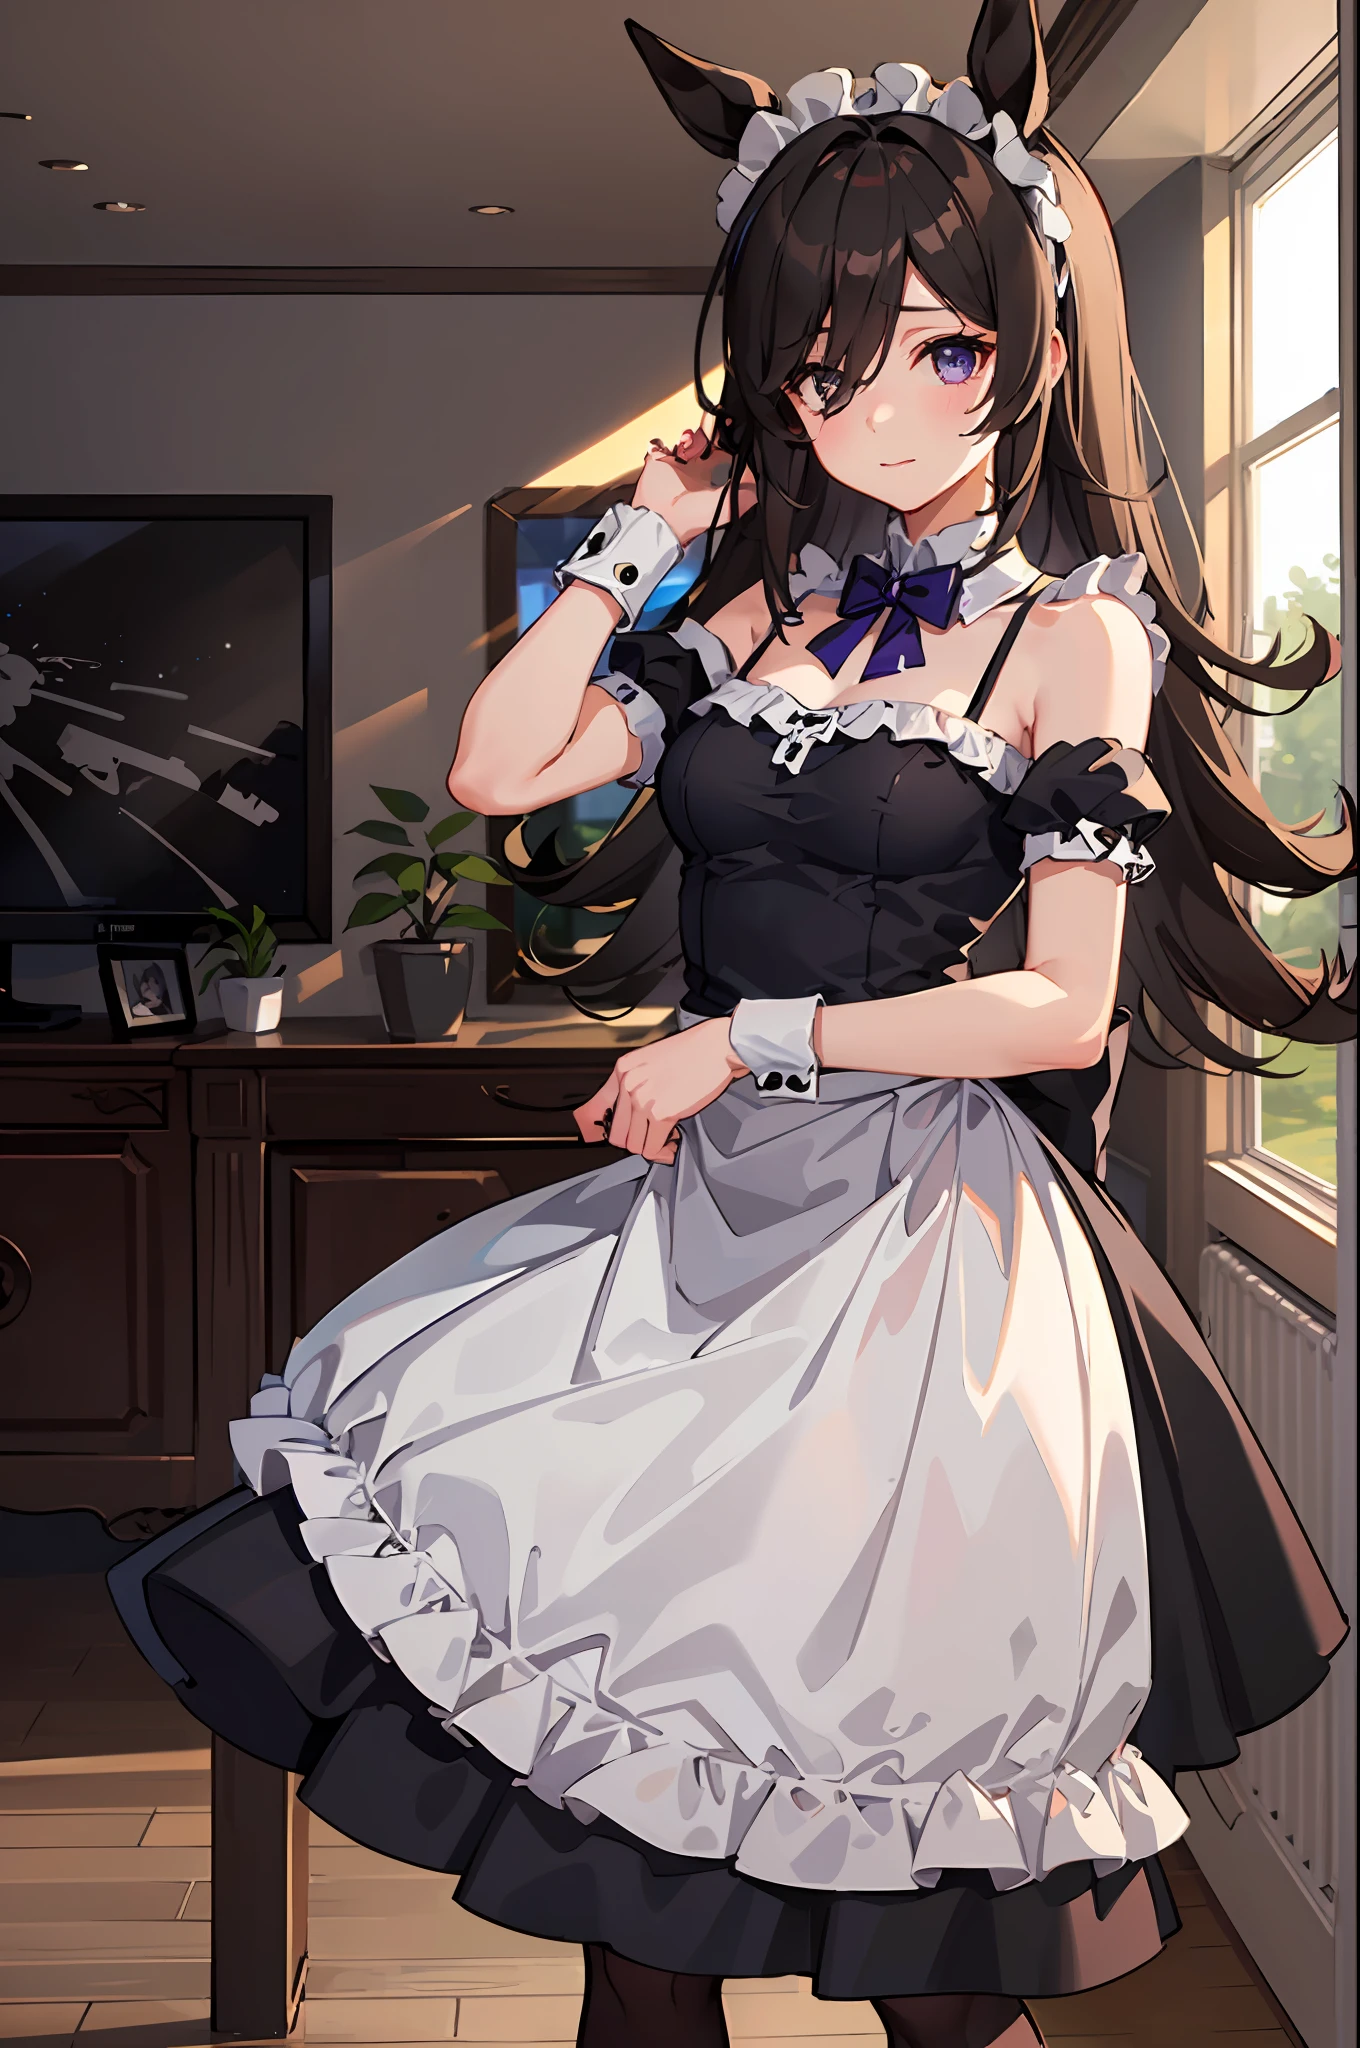 One girl in black and white maid clothes、Black hair((long))、a purple eye((Delicate.Very beautiful eyes))、Hidden in the hair of one eye、Marl、black horse tail、Shy face、black and white maid uniform、Background Cafe、inside in room、cafeteria